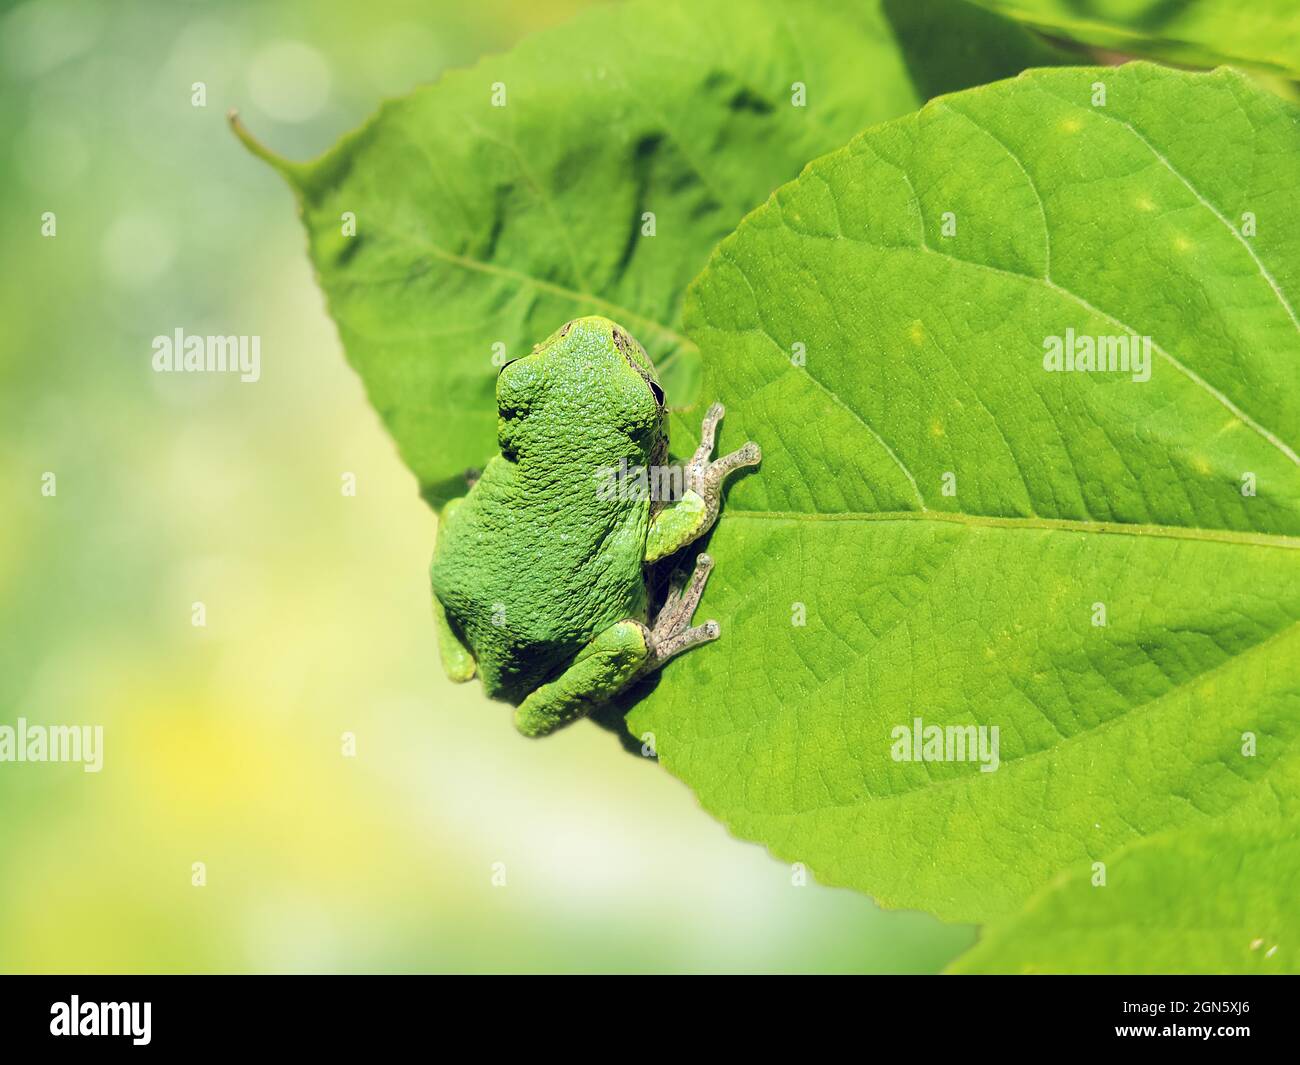 American Green Tree Frog on a green leaf Stock Photo